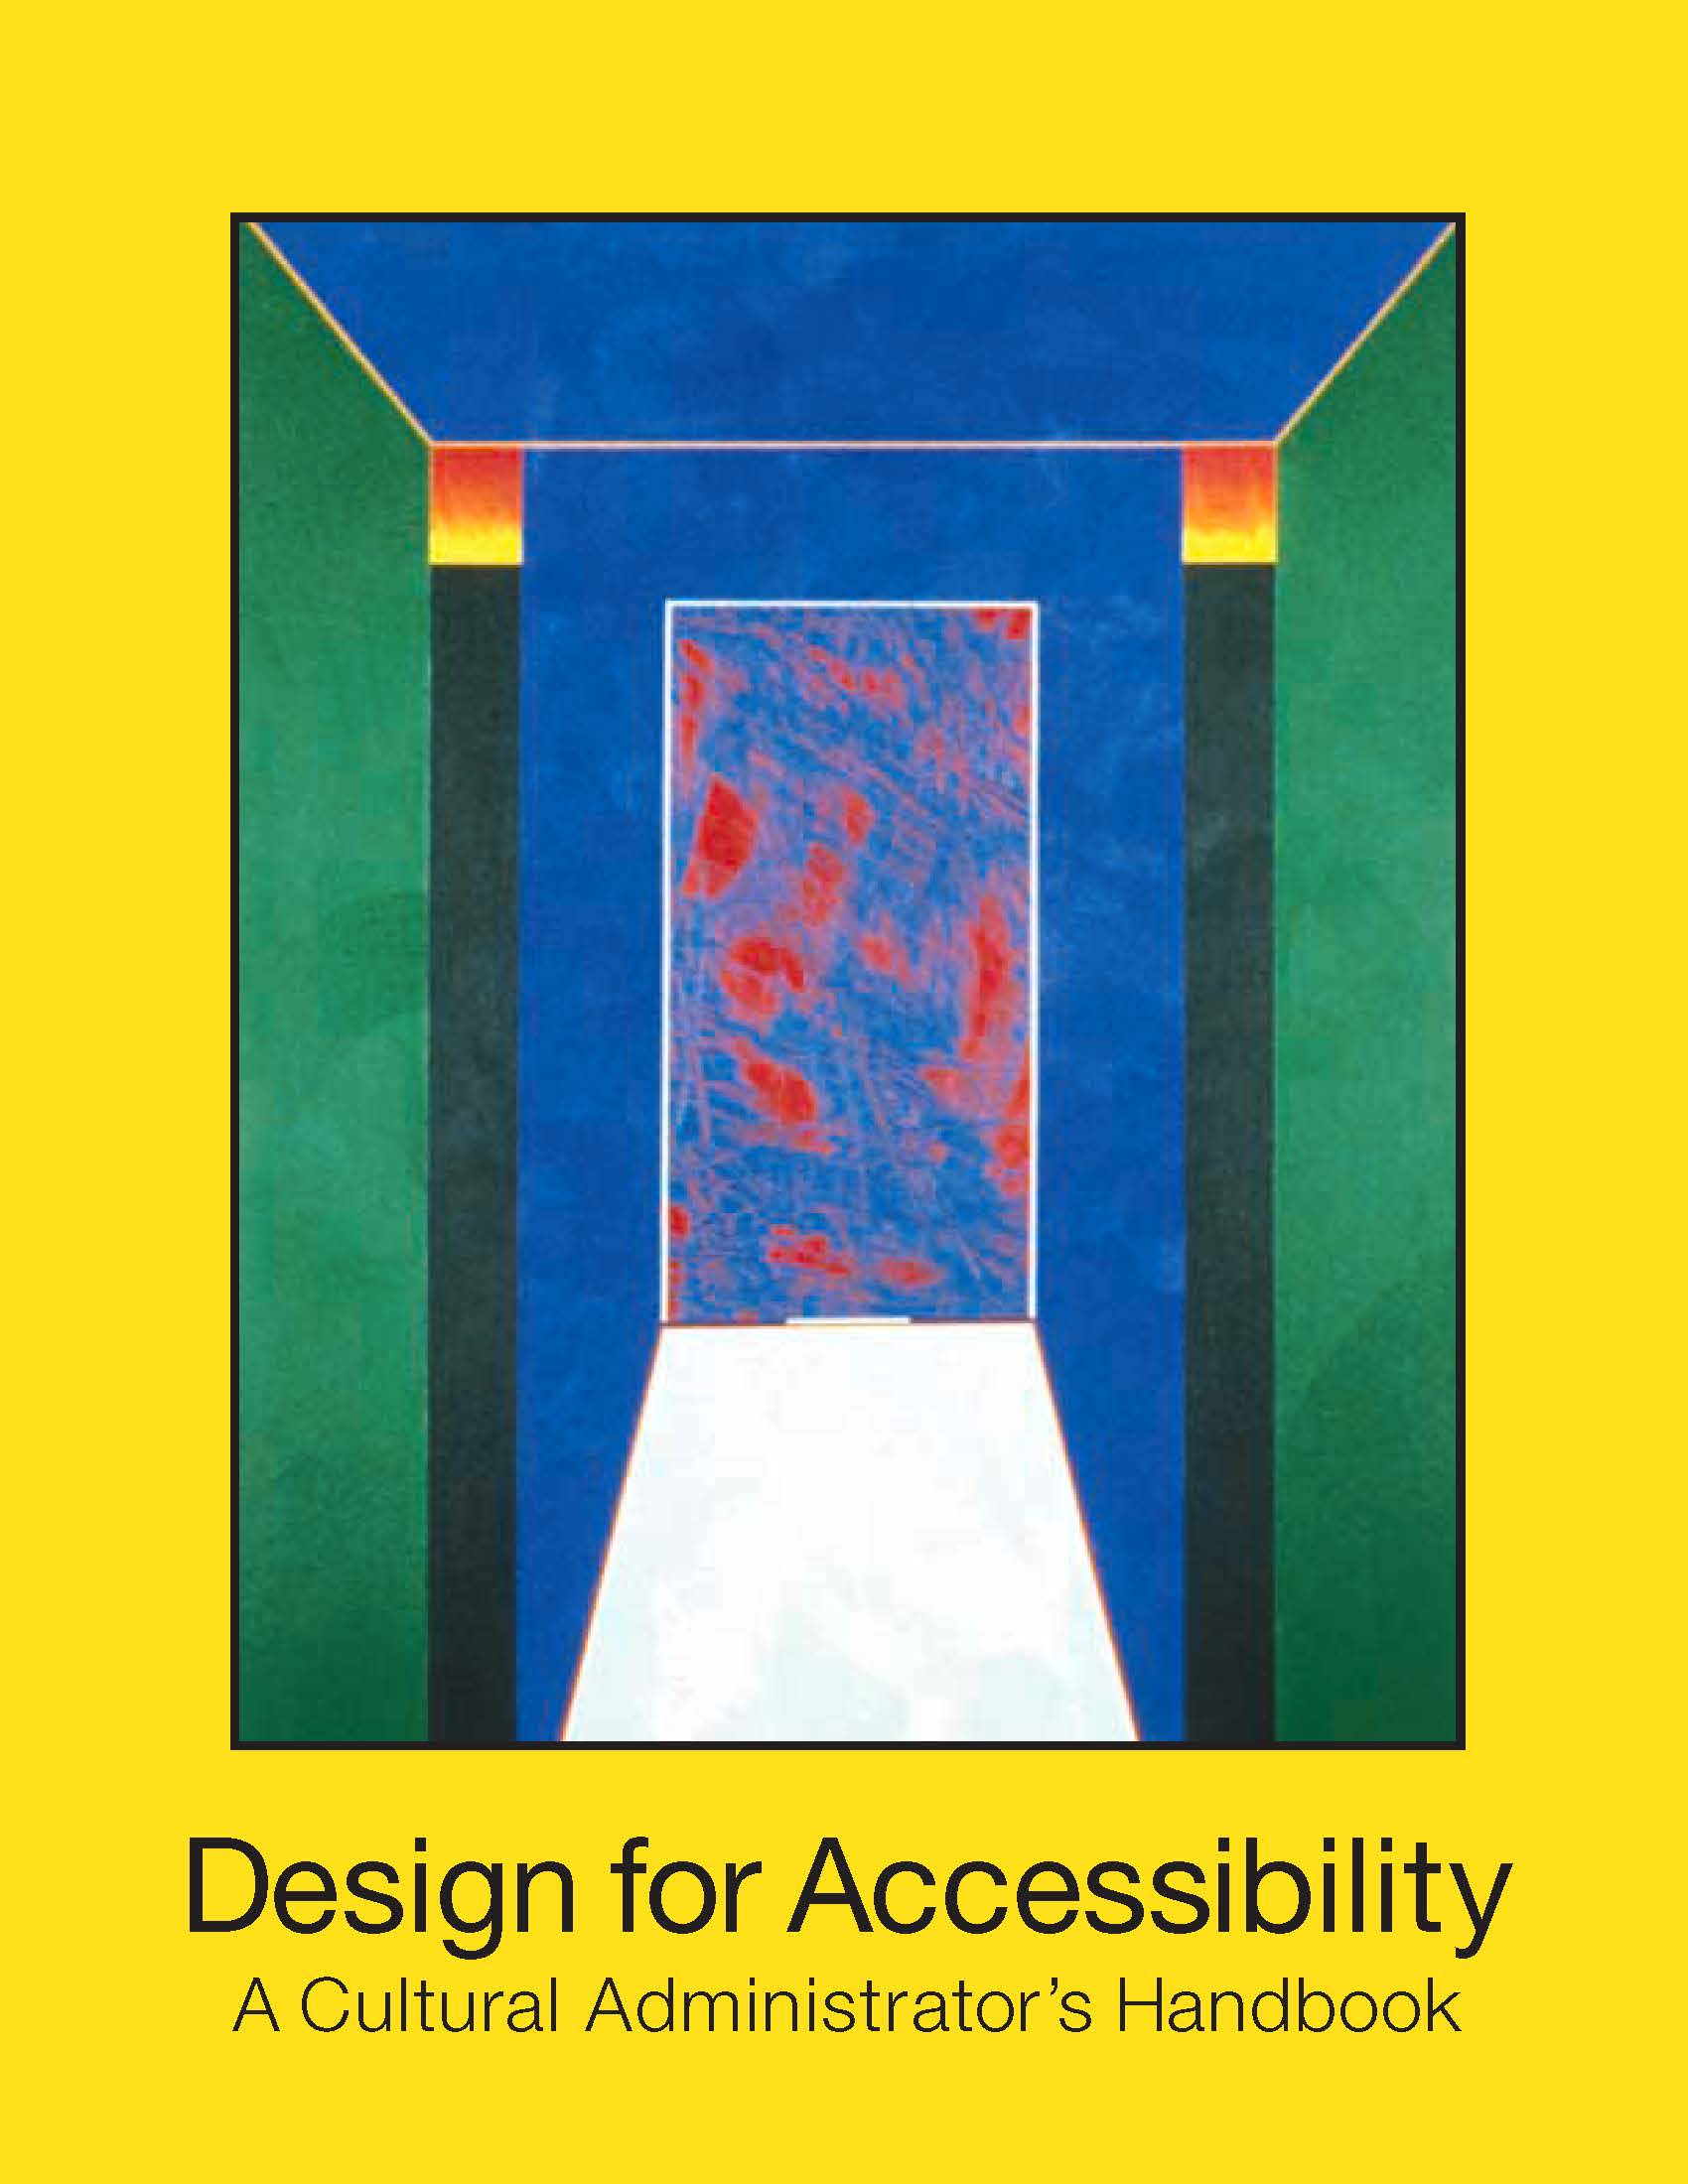 The Kennedy Centre's Design for Accessibility 